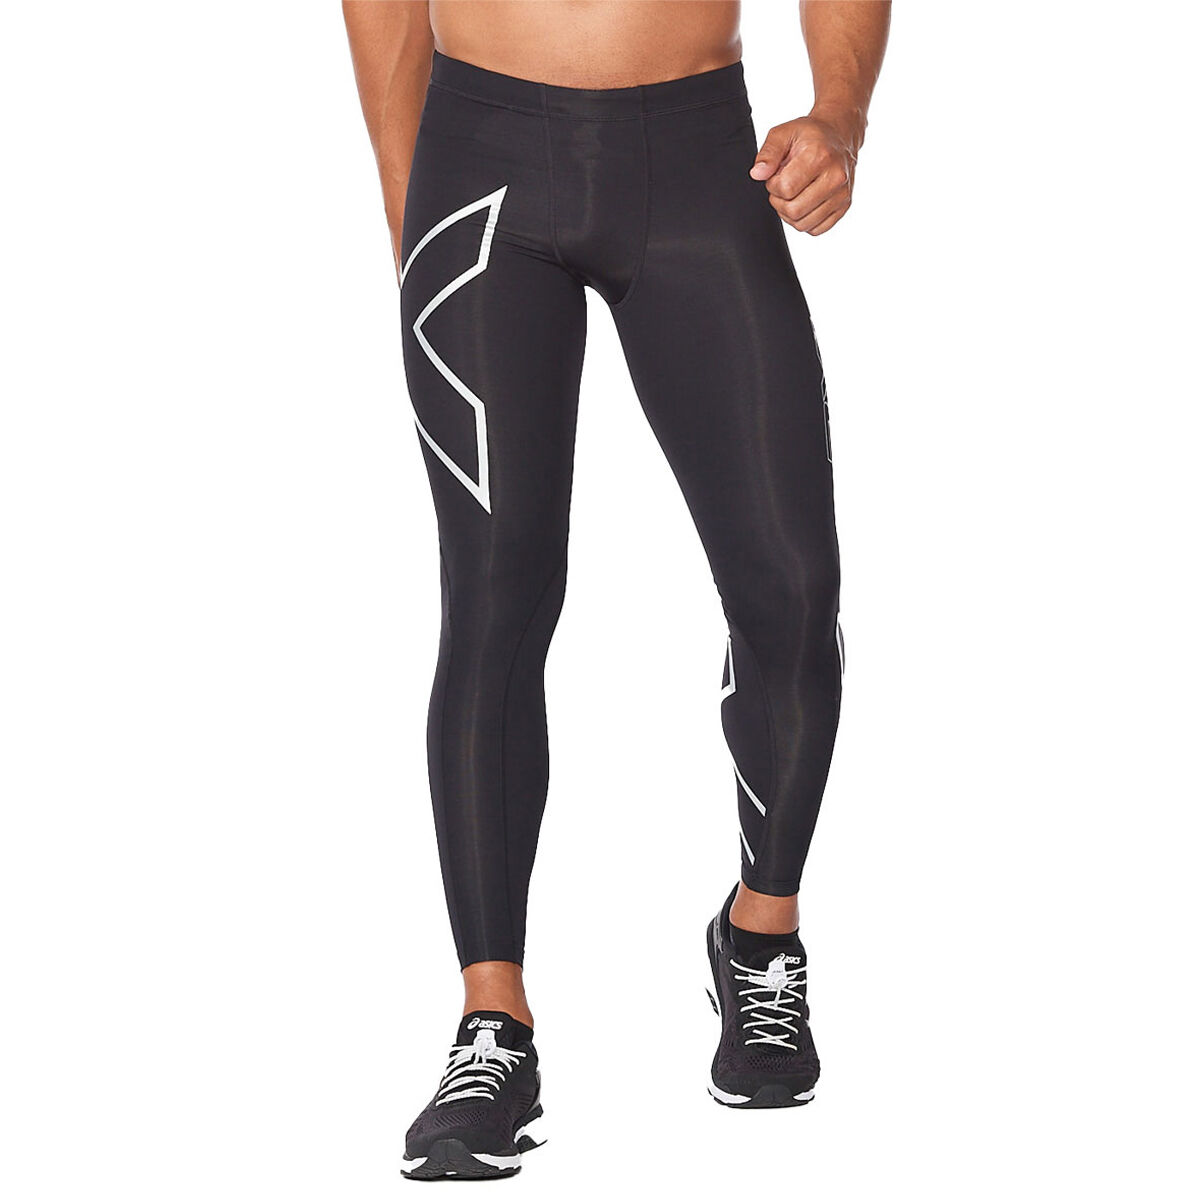 Men's Basketball Sports Tight Pants Compression Workout